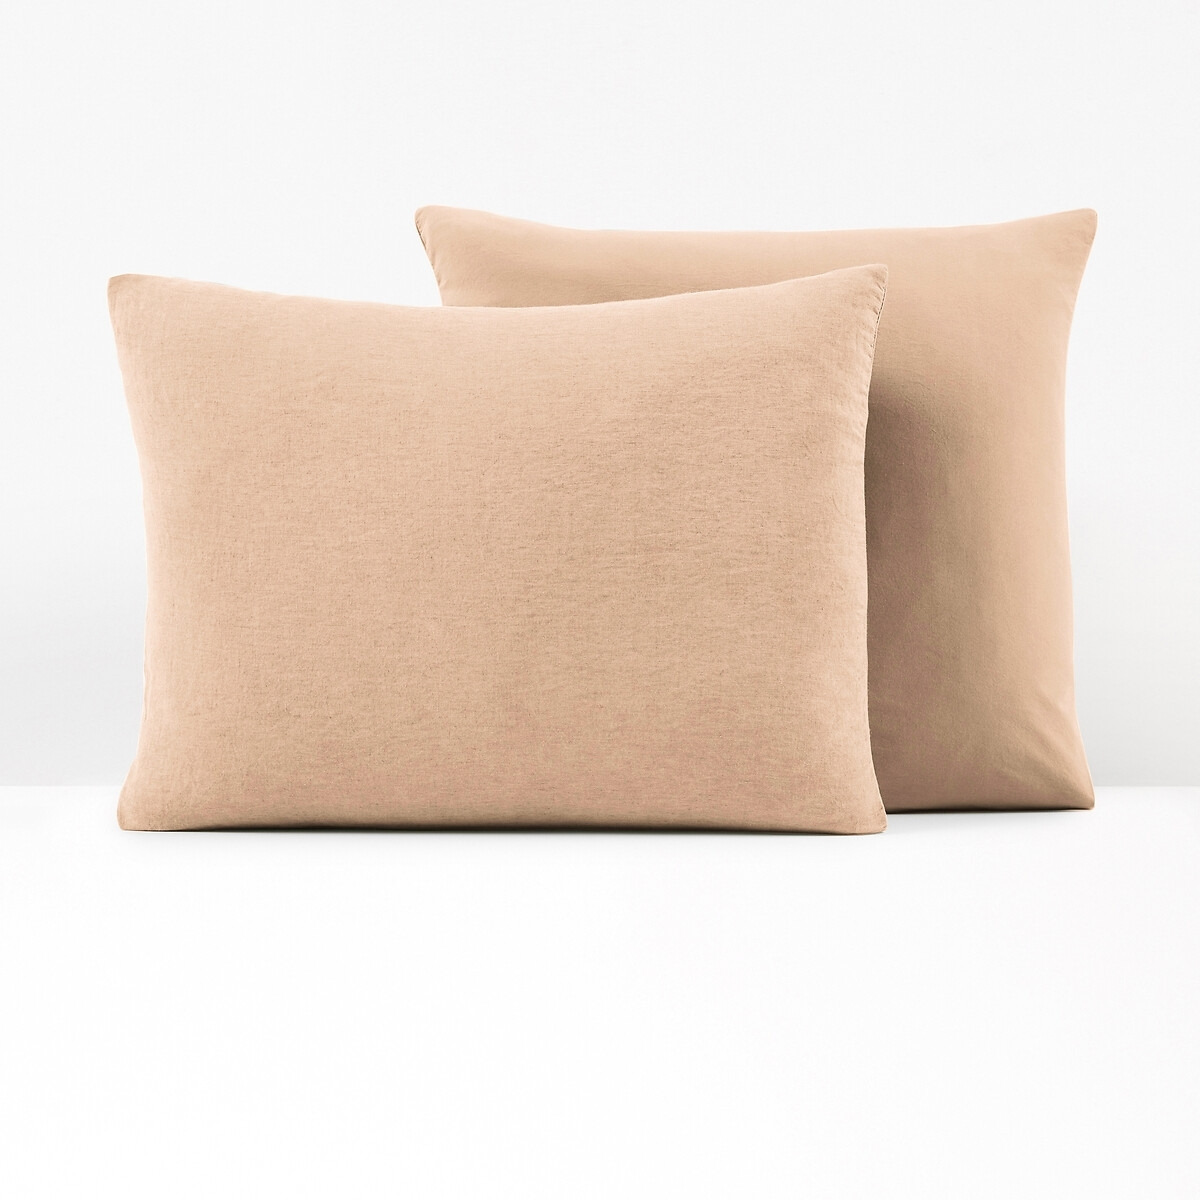 Annaba Two-Sided Washed Linen and Cotton Pillowcase - image 1